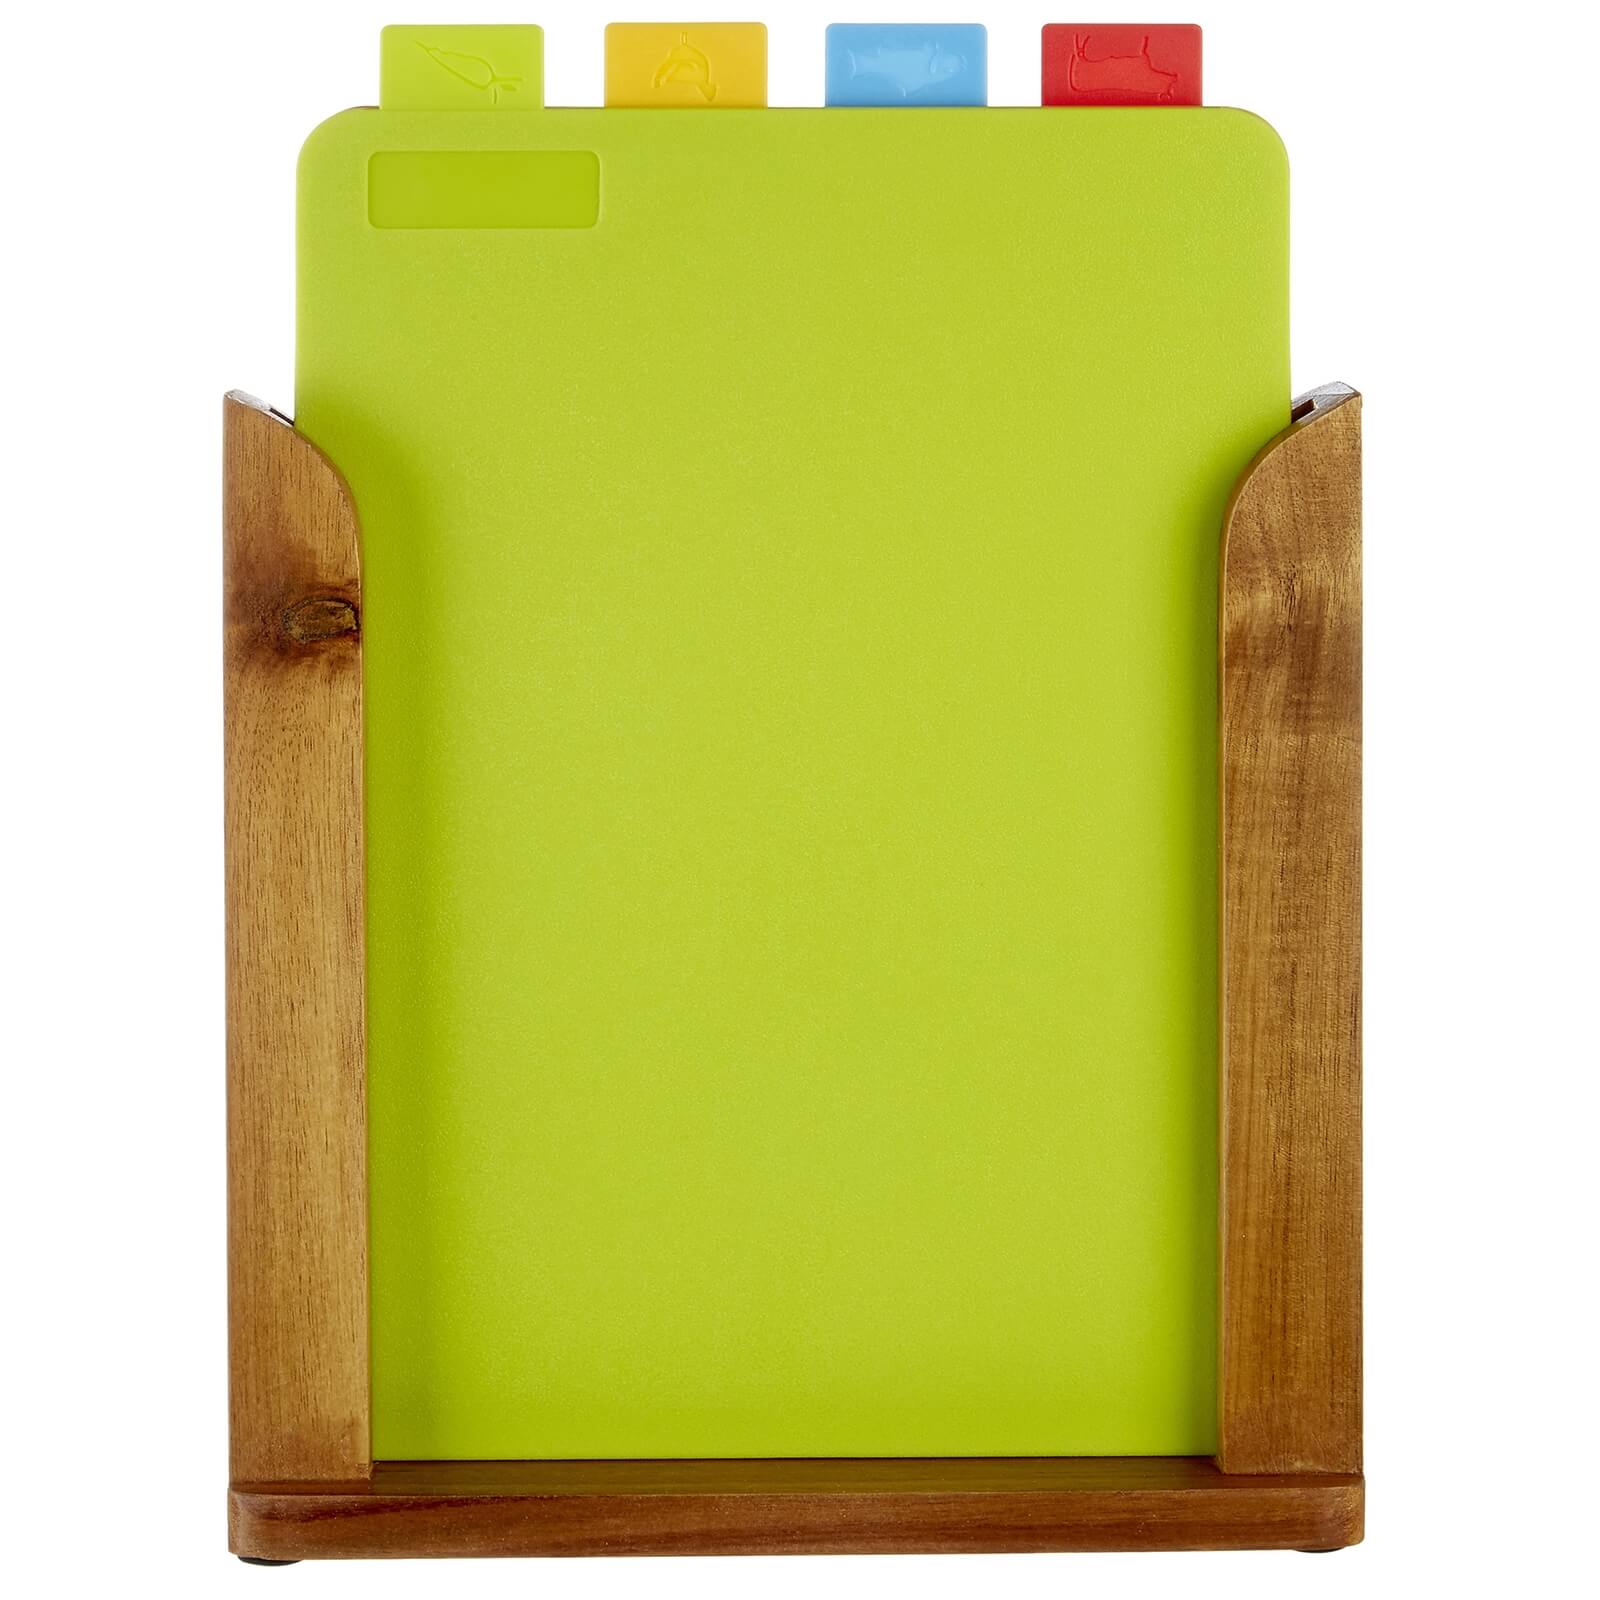 Wood Stand Chopping Boards - Set of 4